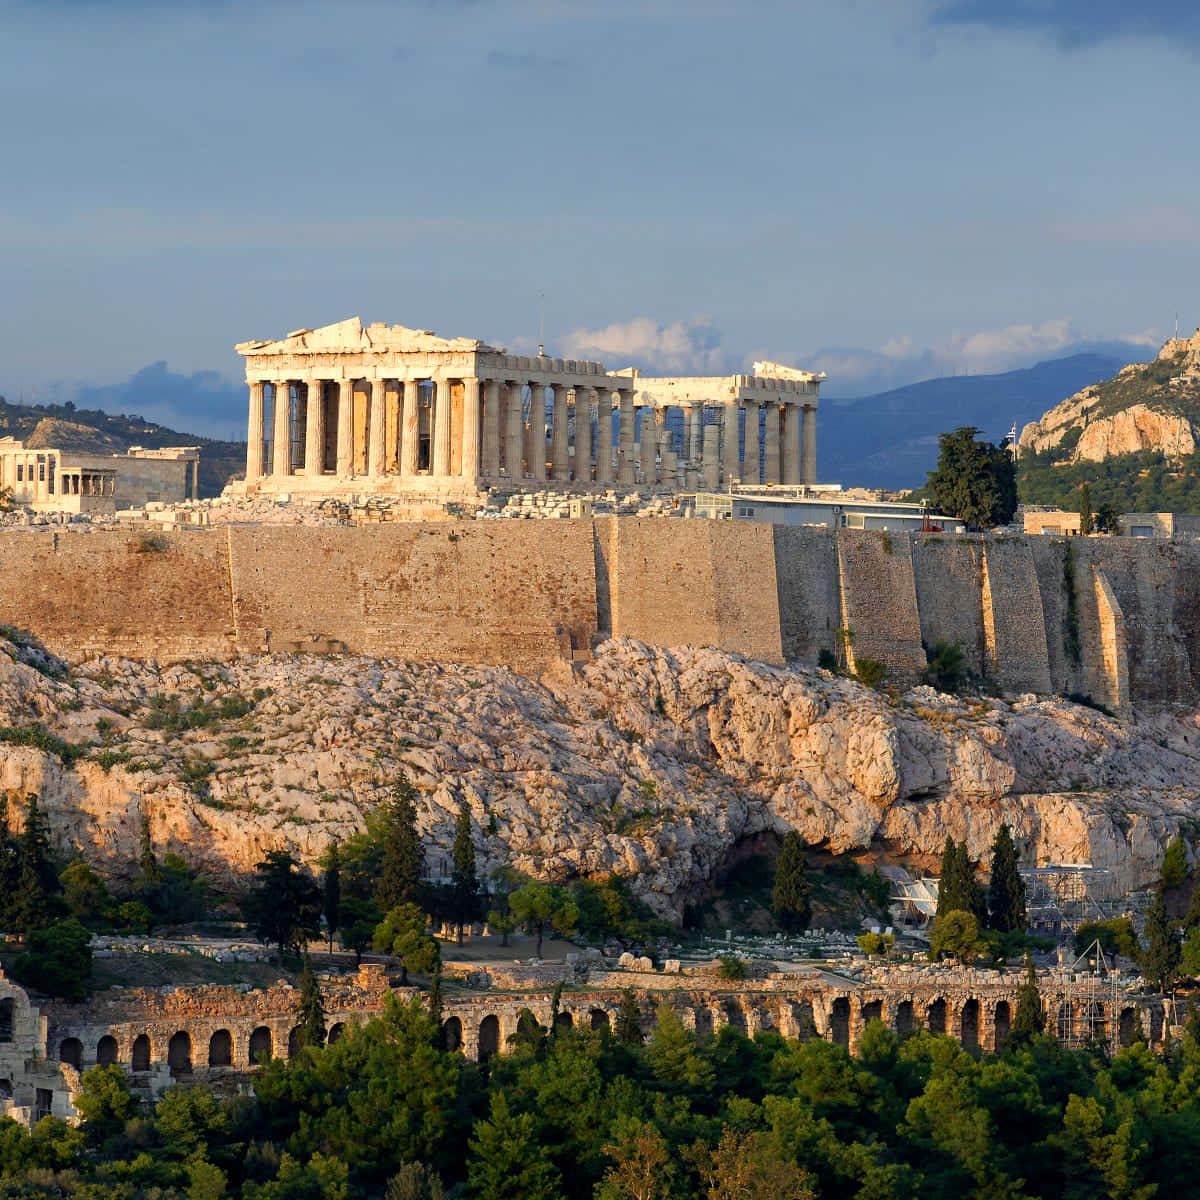 The Parthenon Is Atop A Hill With Trees And A View Of The City